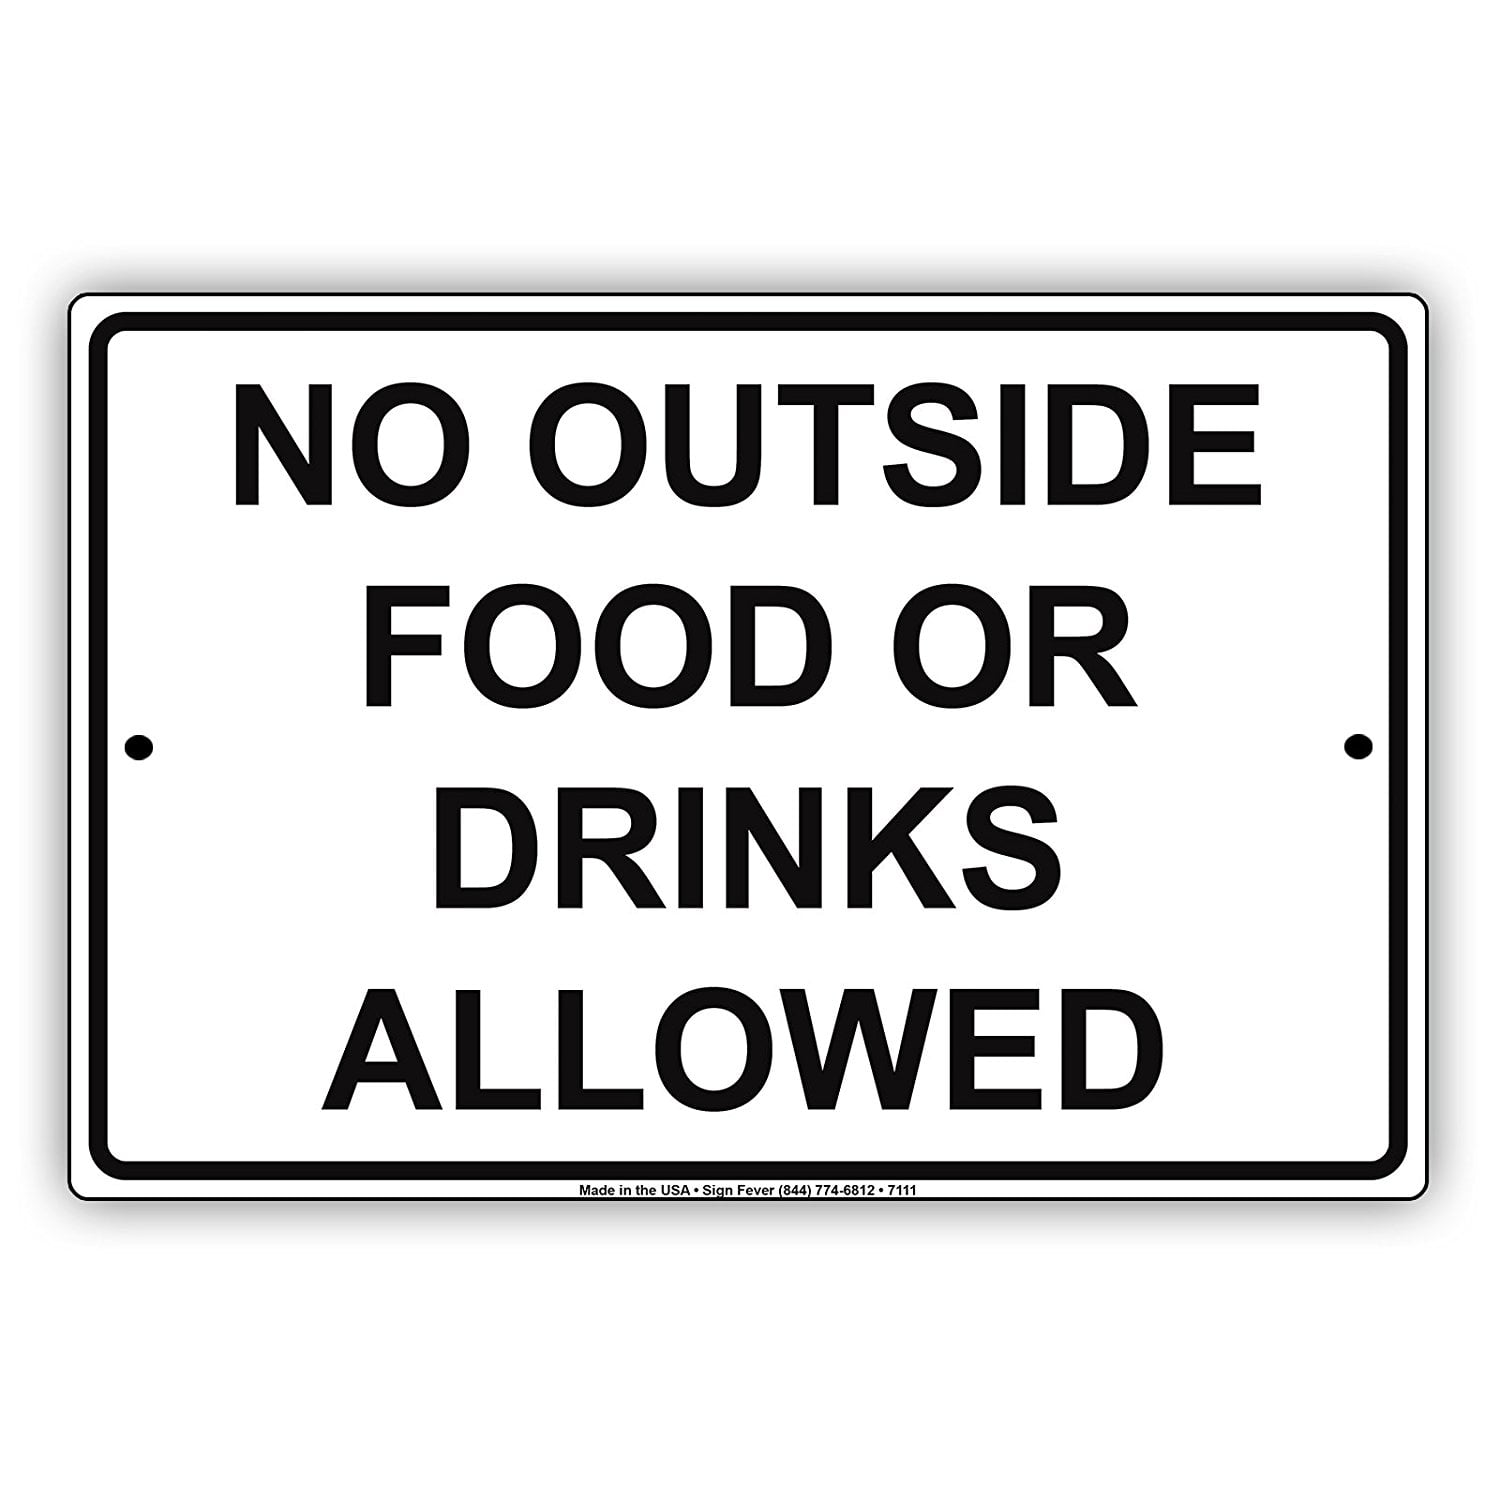 Additional property is not allowed. Food sign. Знак аутсайда. Not allowed. Outdoor shop Metal sign.